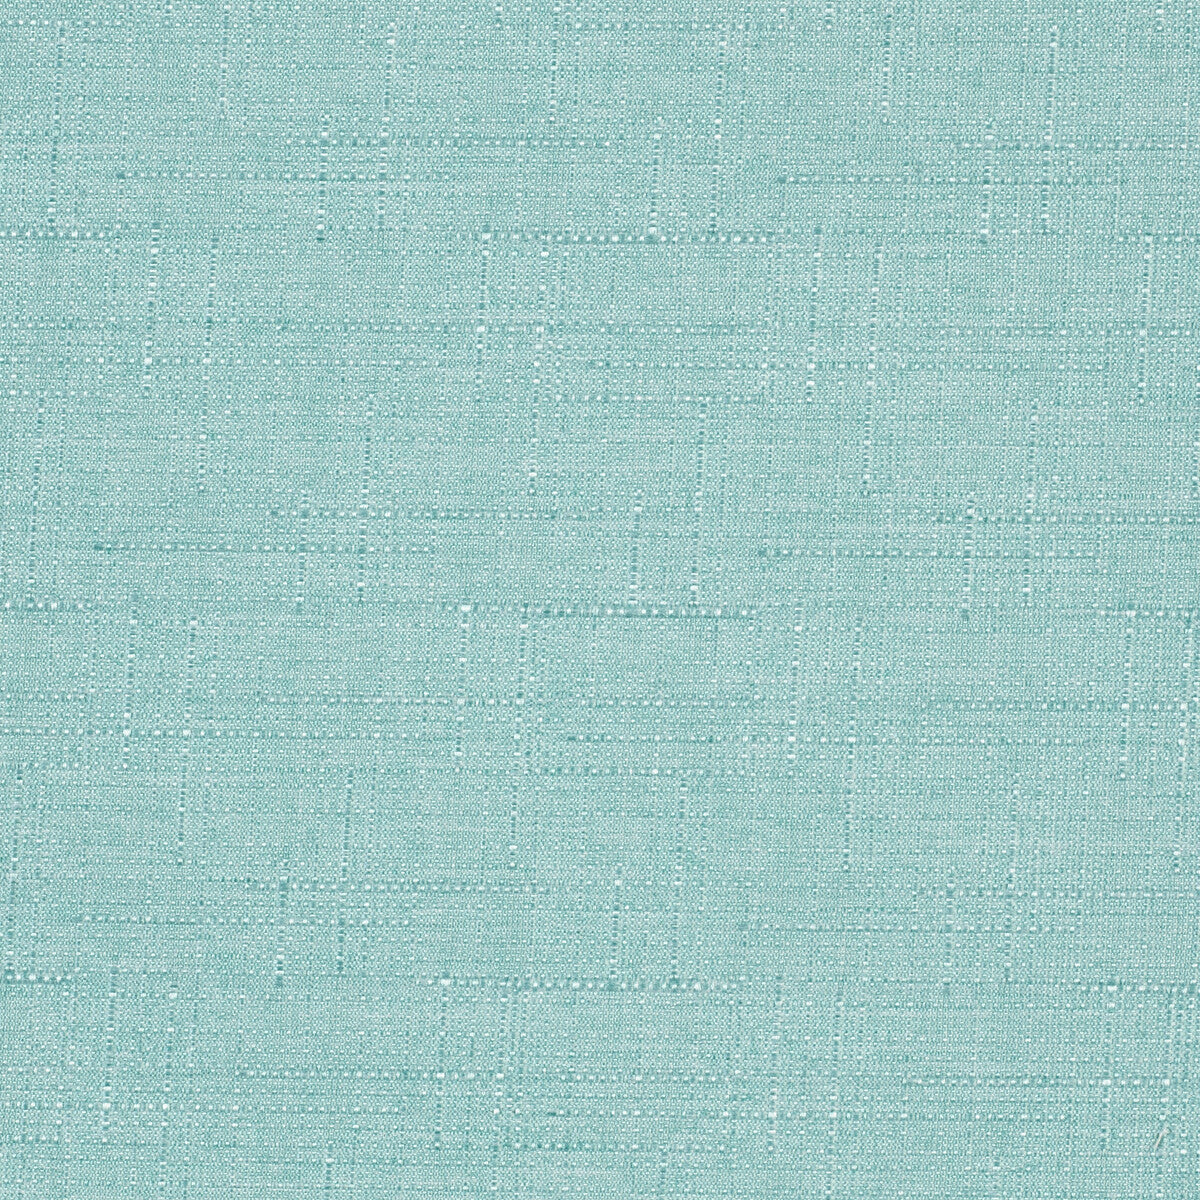 Kravet Contract fabric in 4317-15 color - pattern 4317.15.0 - by Kravet Contract